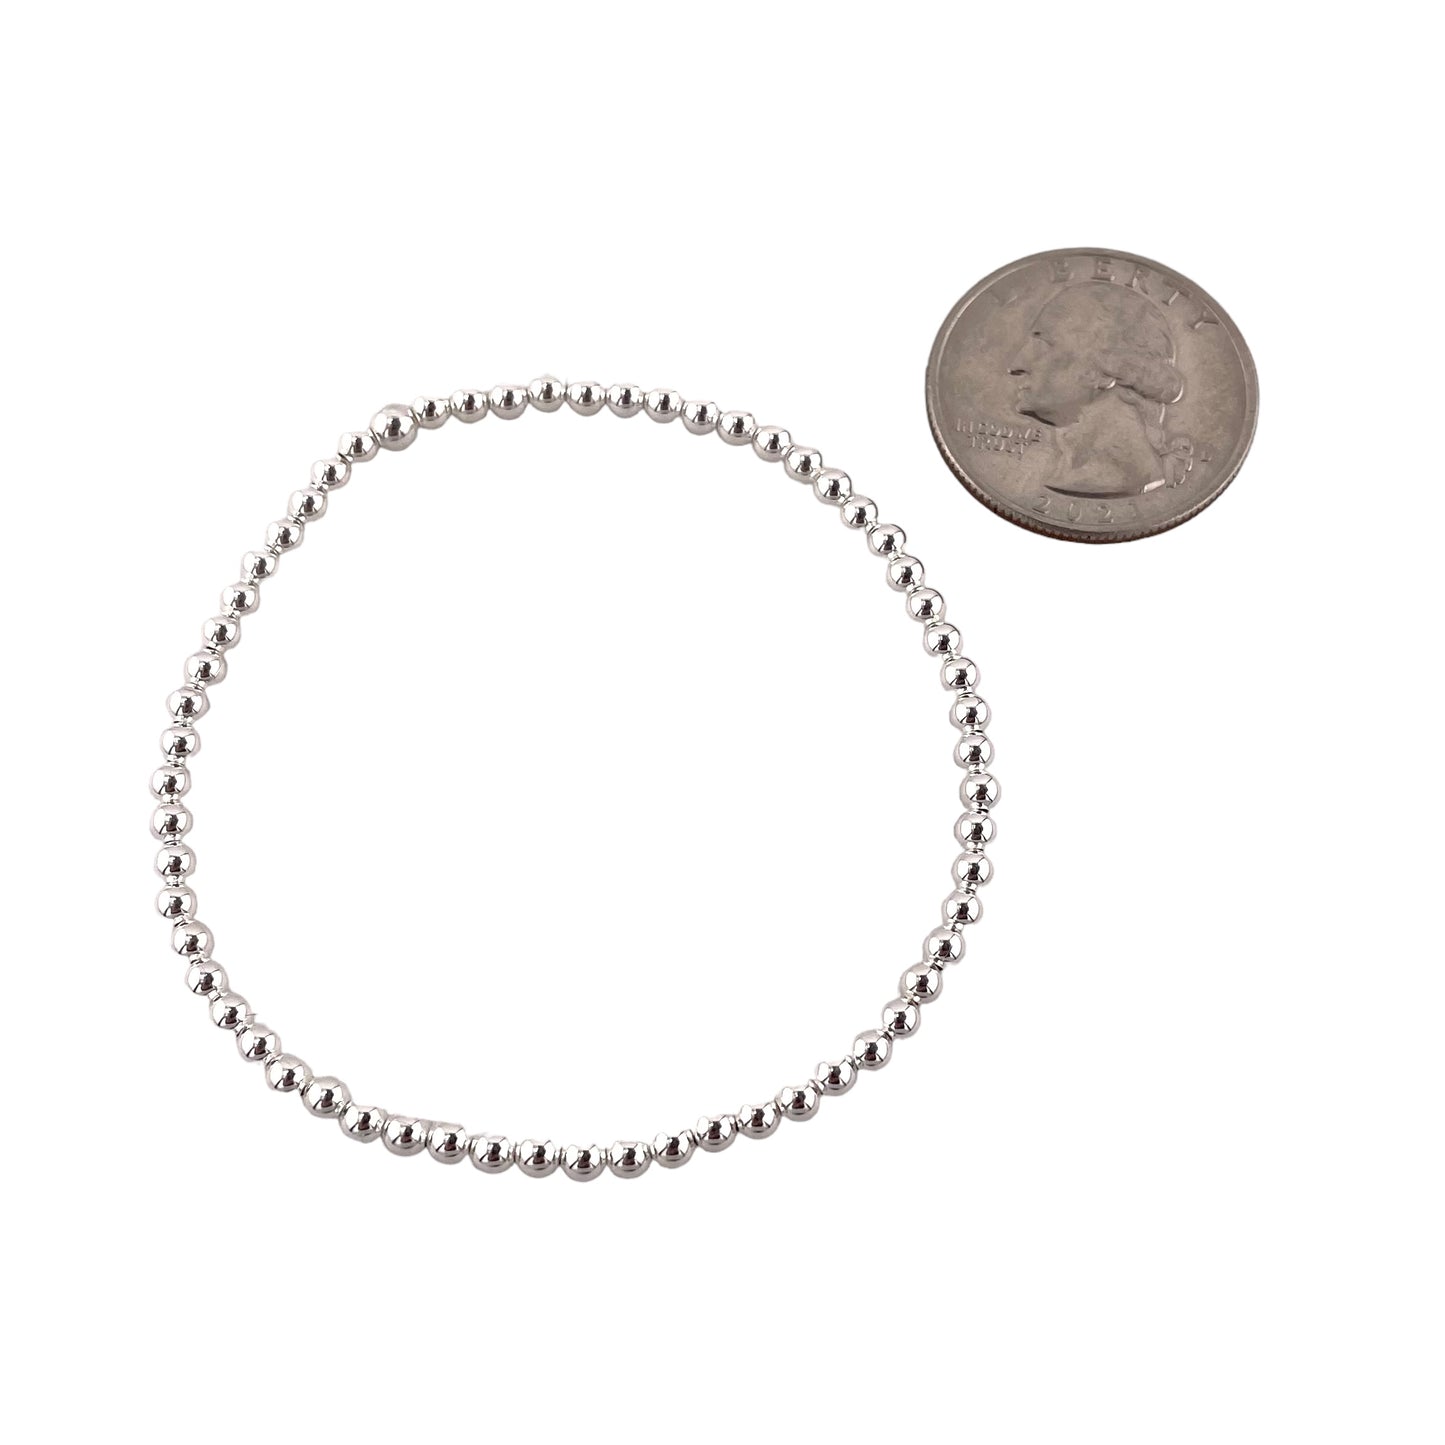 Bead Stretch Bracelet Sterling Silver Available in 3mm to 12mm